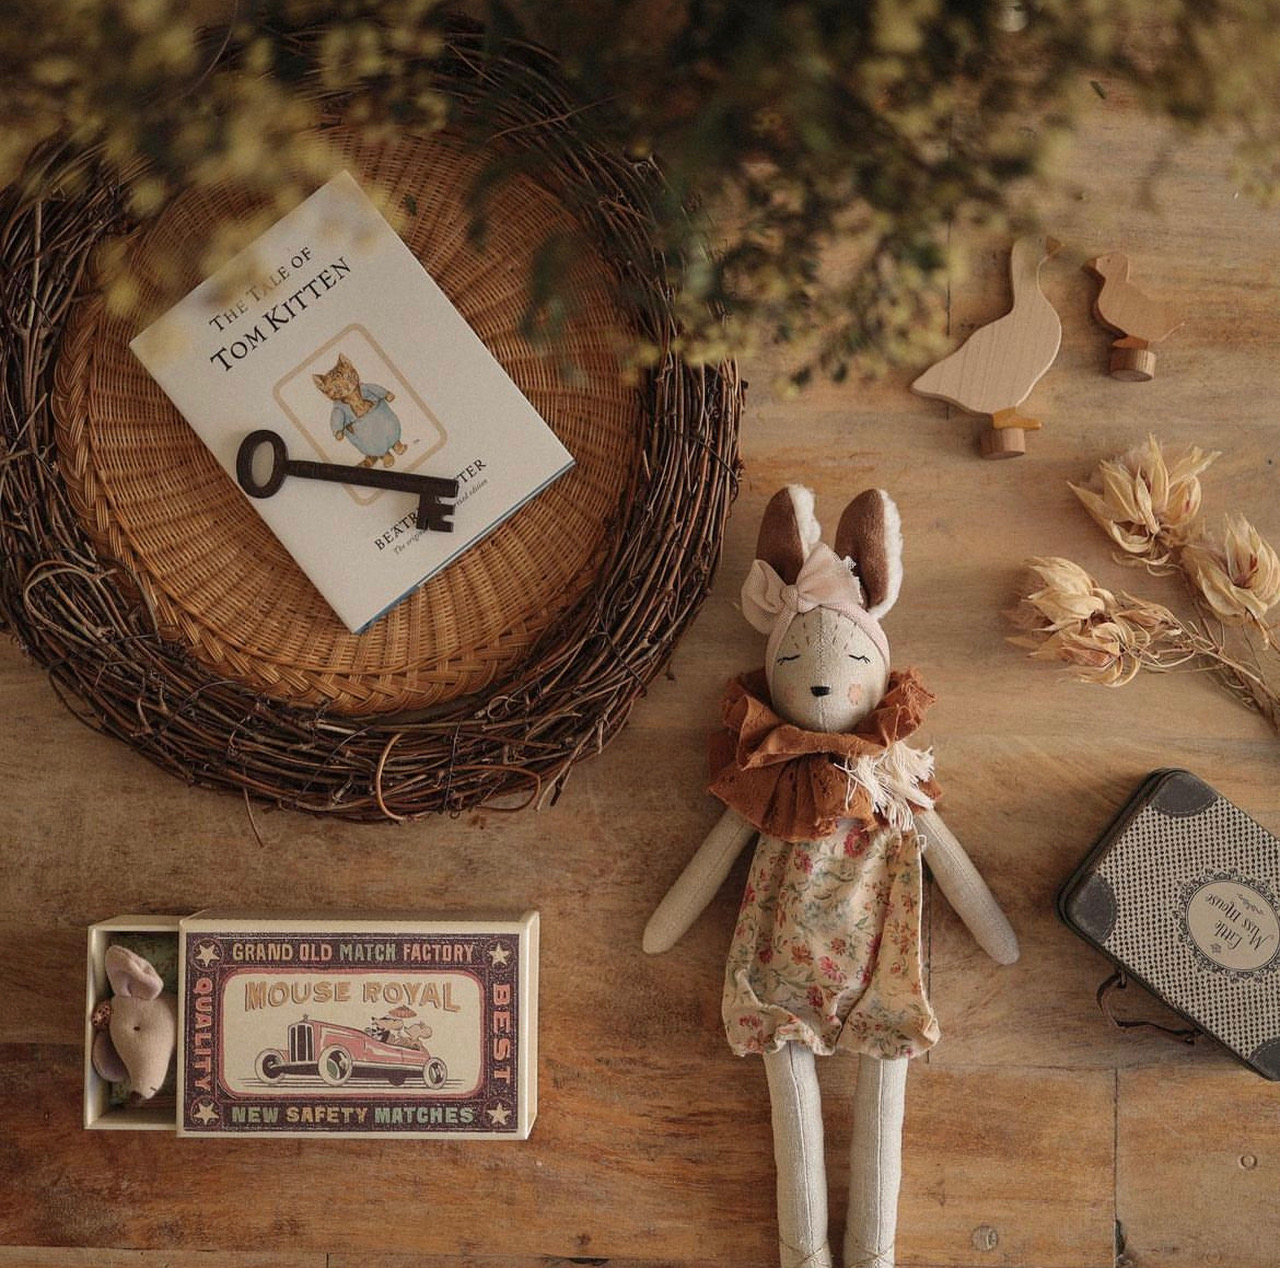 Little French Heart Gifts from Paris & Provence. Image by Jess Farthing.